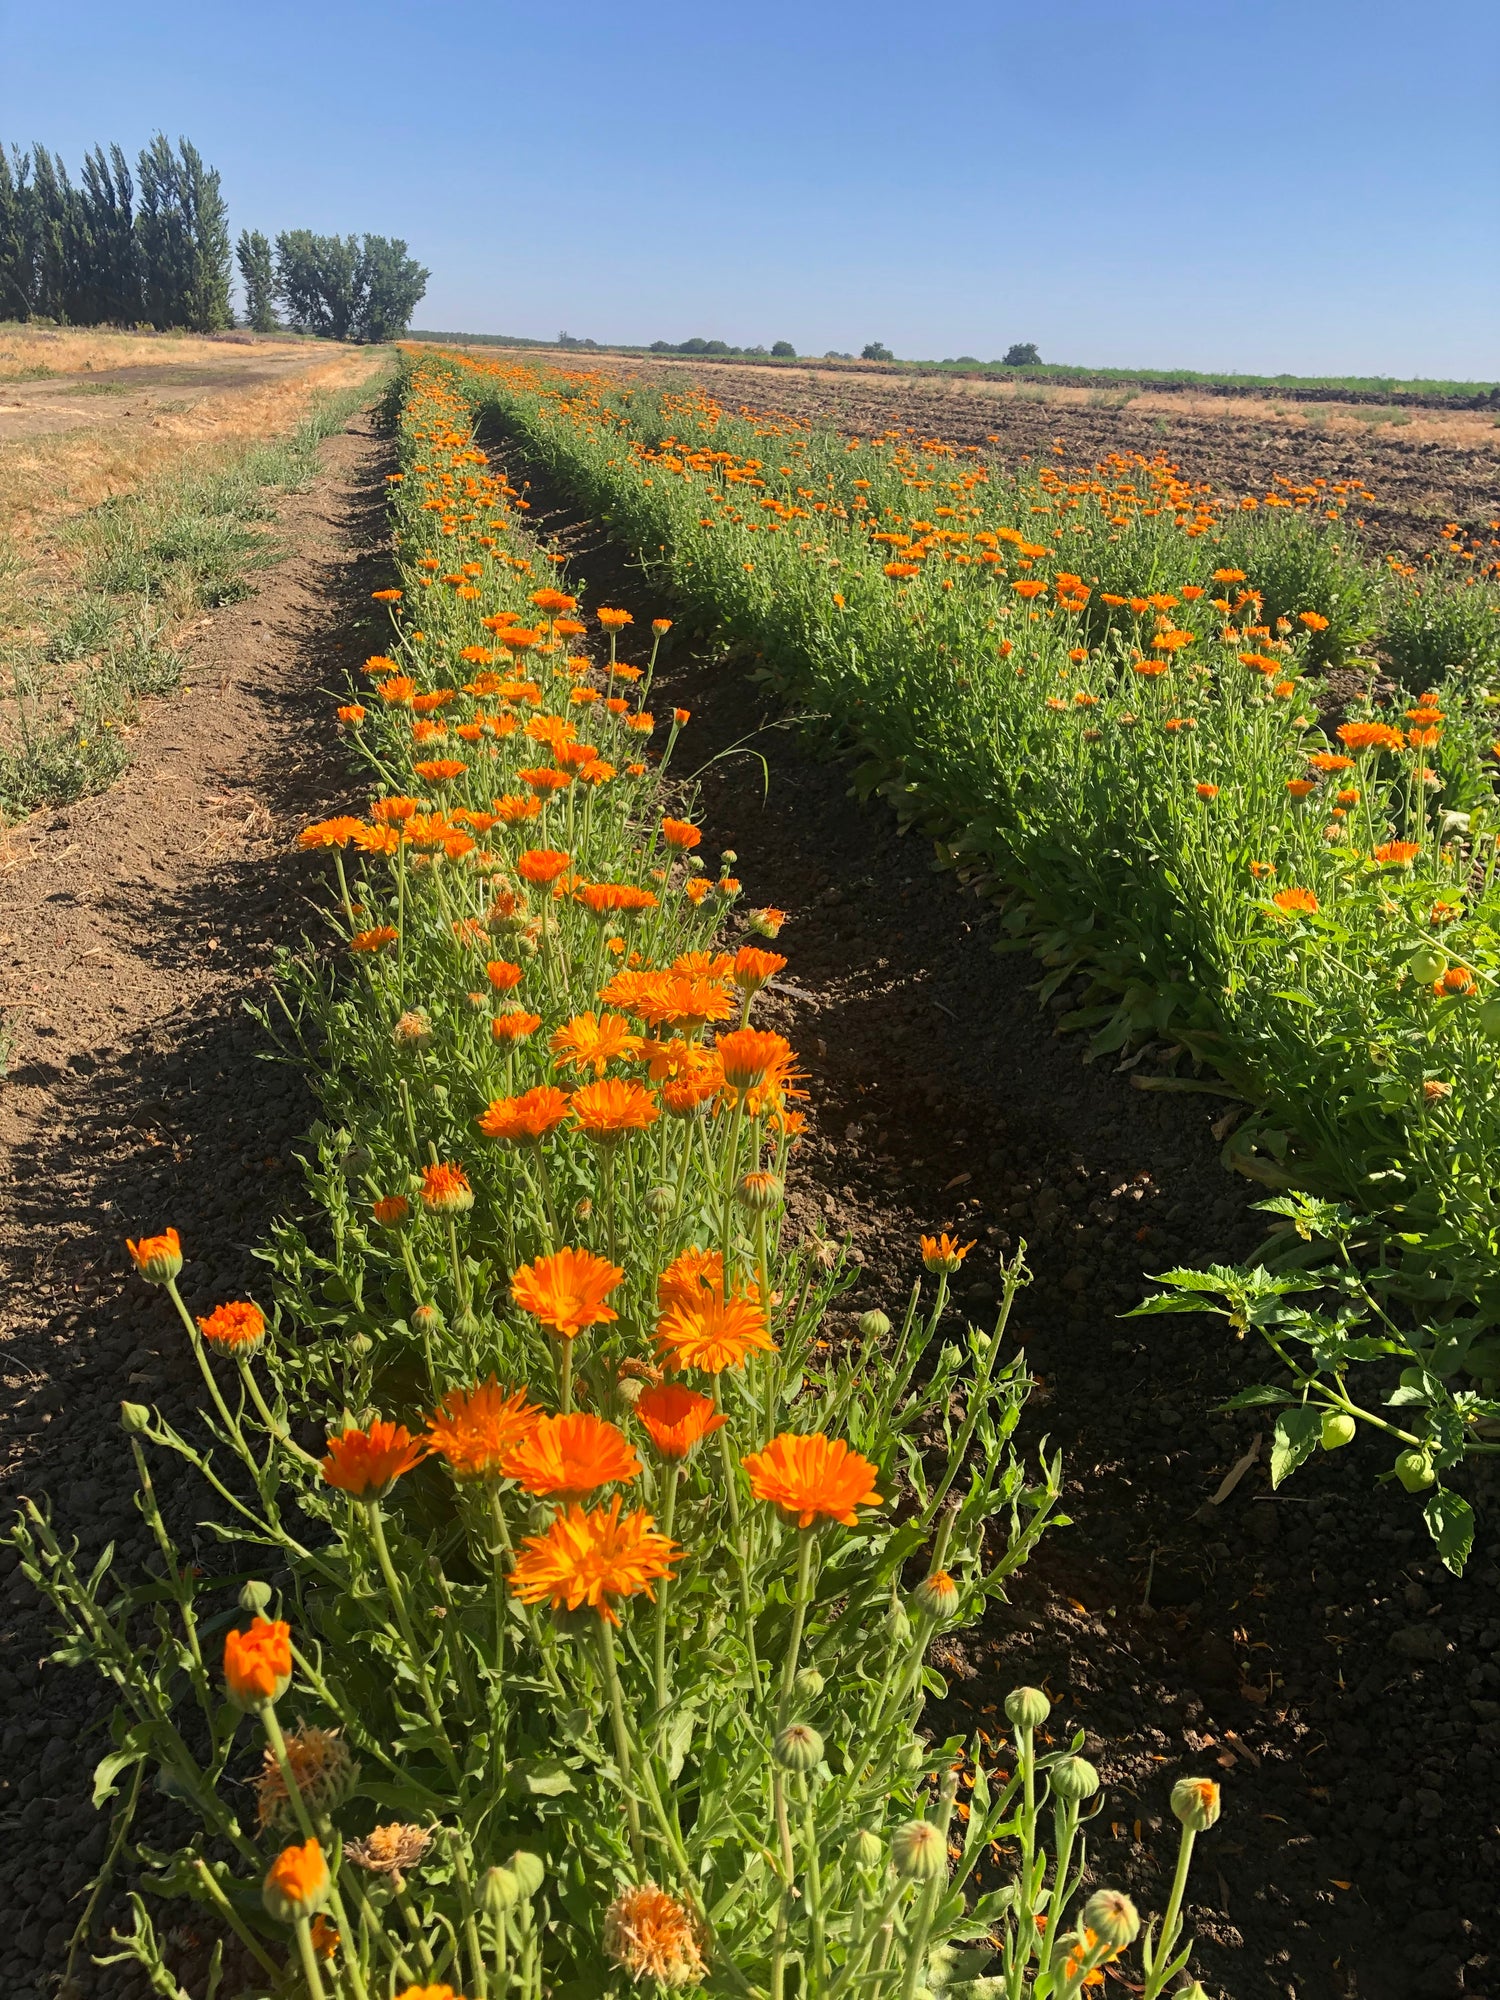 Rosw of bright orange calendula flowers in bloom at Eatwell Farm, with blue skies and tall poplar trees in the background.